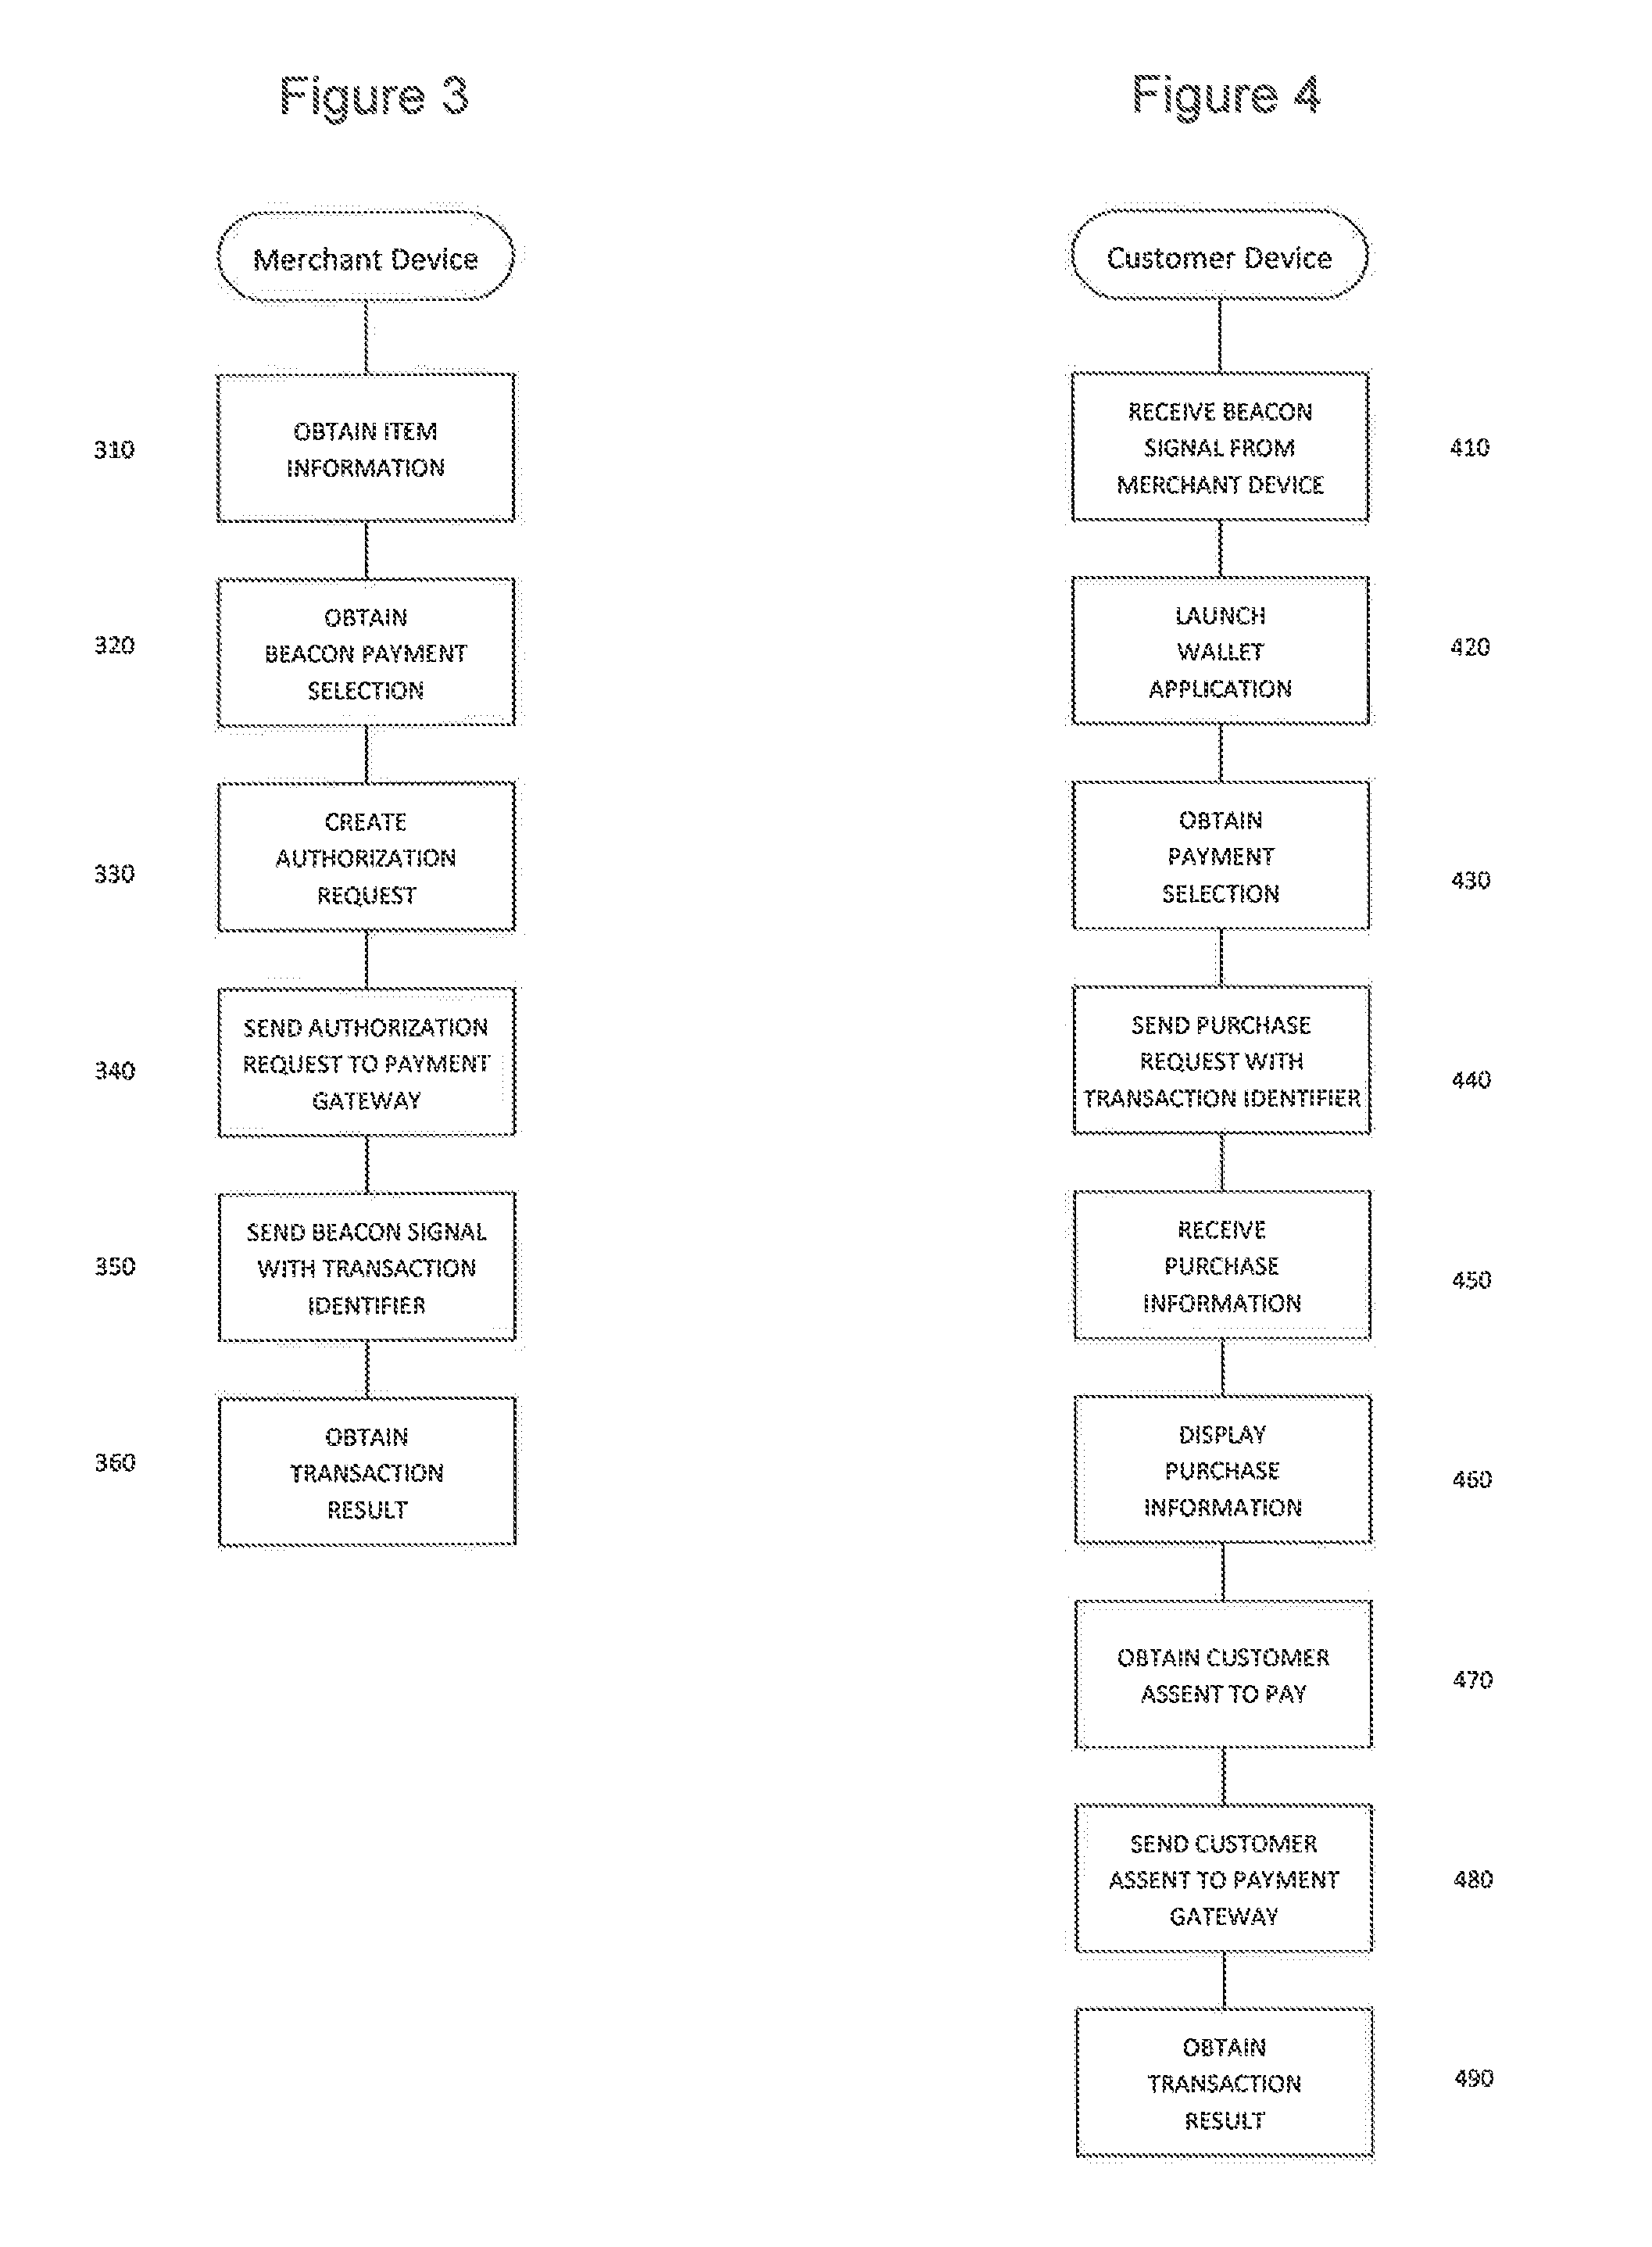 System and method for facilitating a purchase transaction using beacon equipped devices